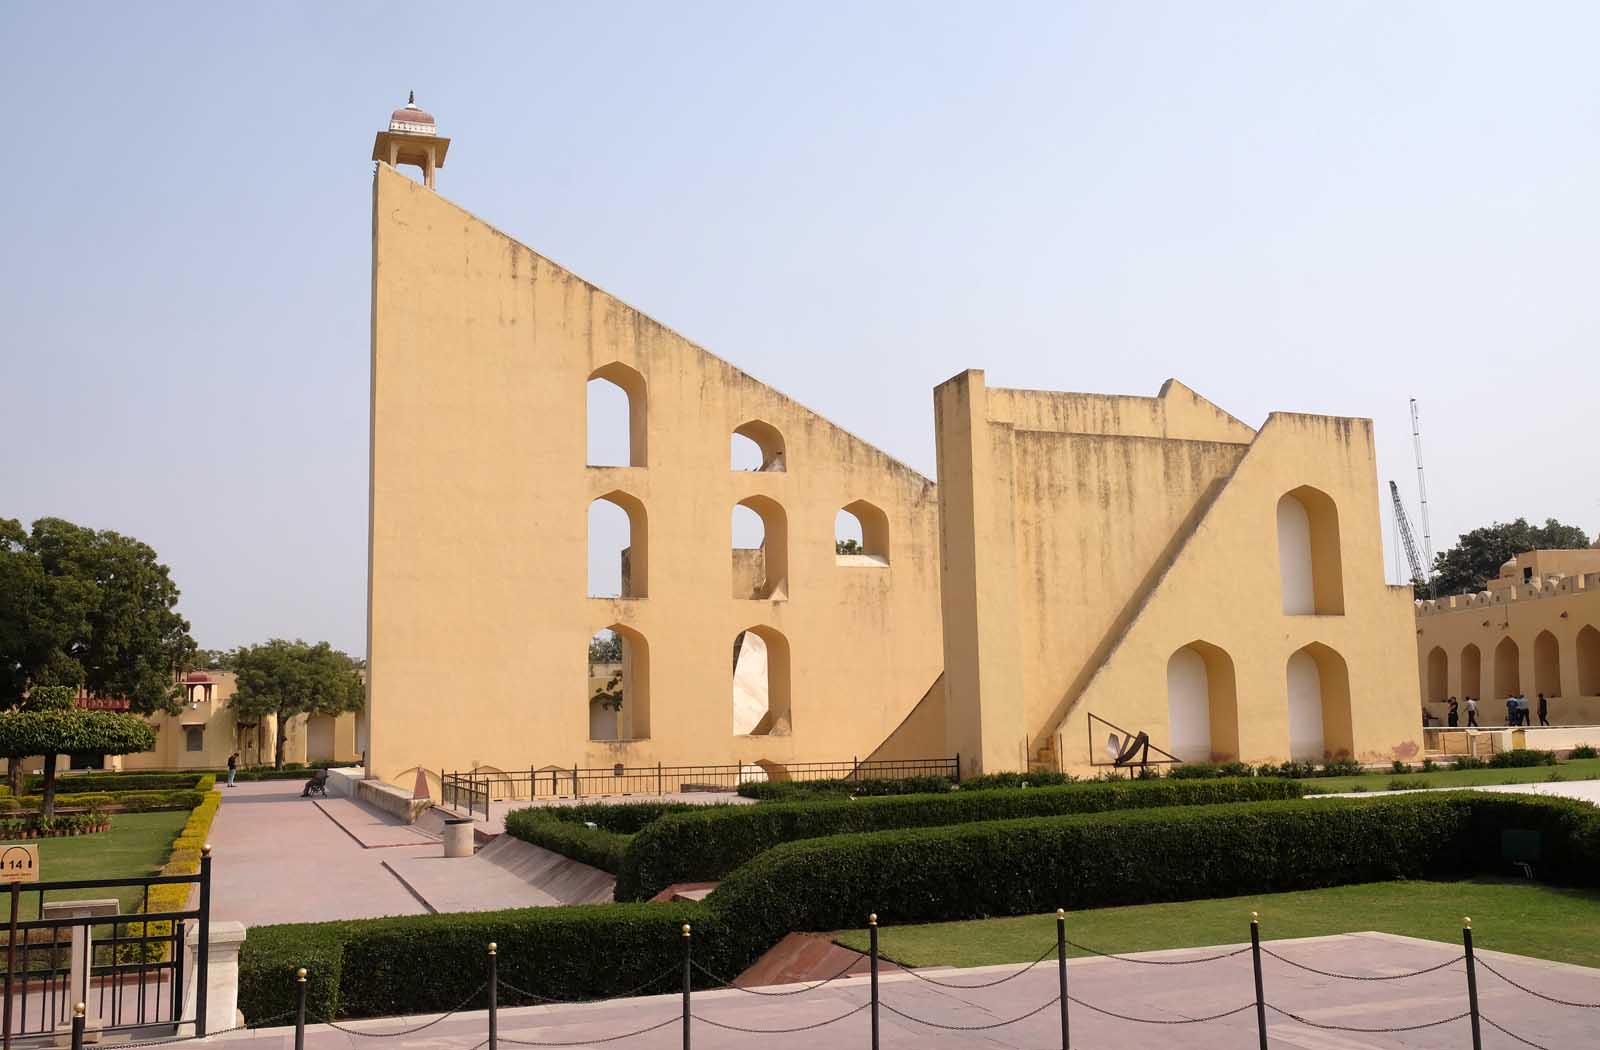 facts about india world's largest sundial